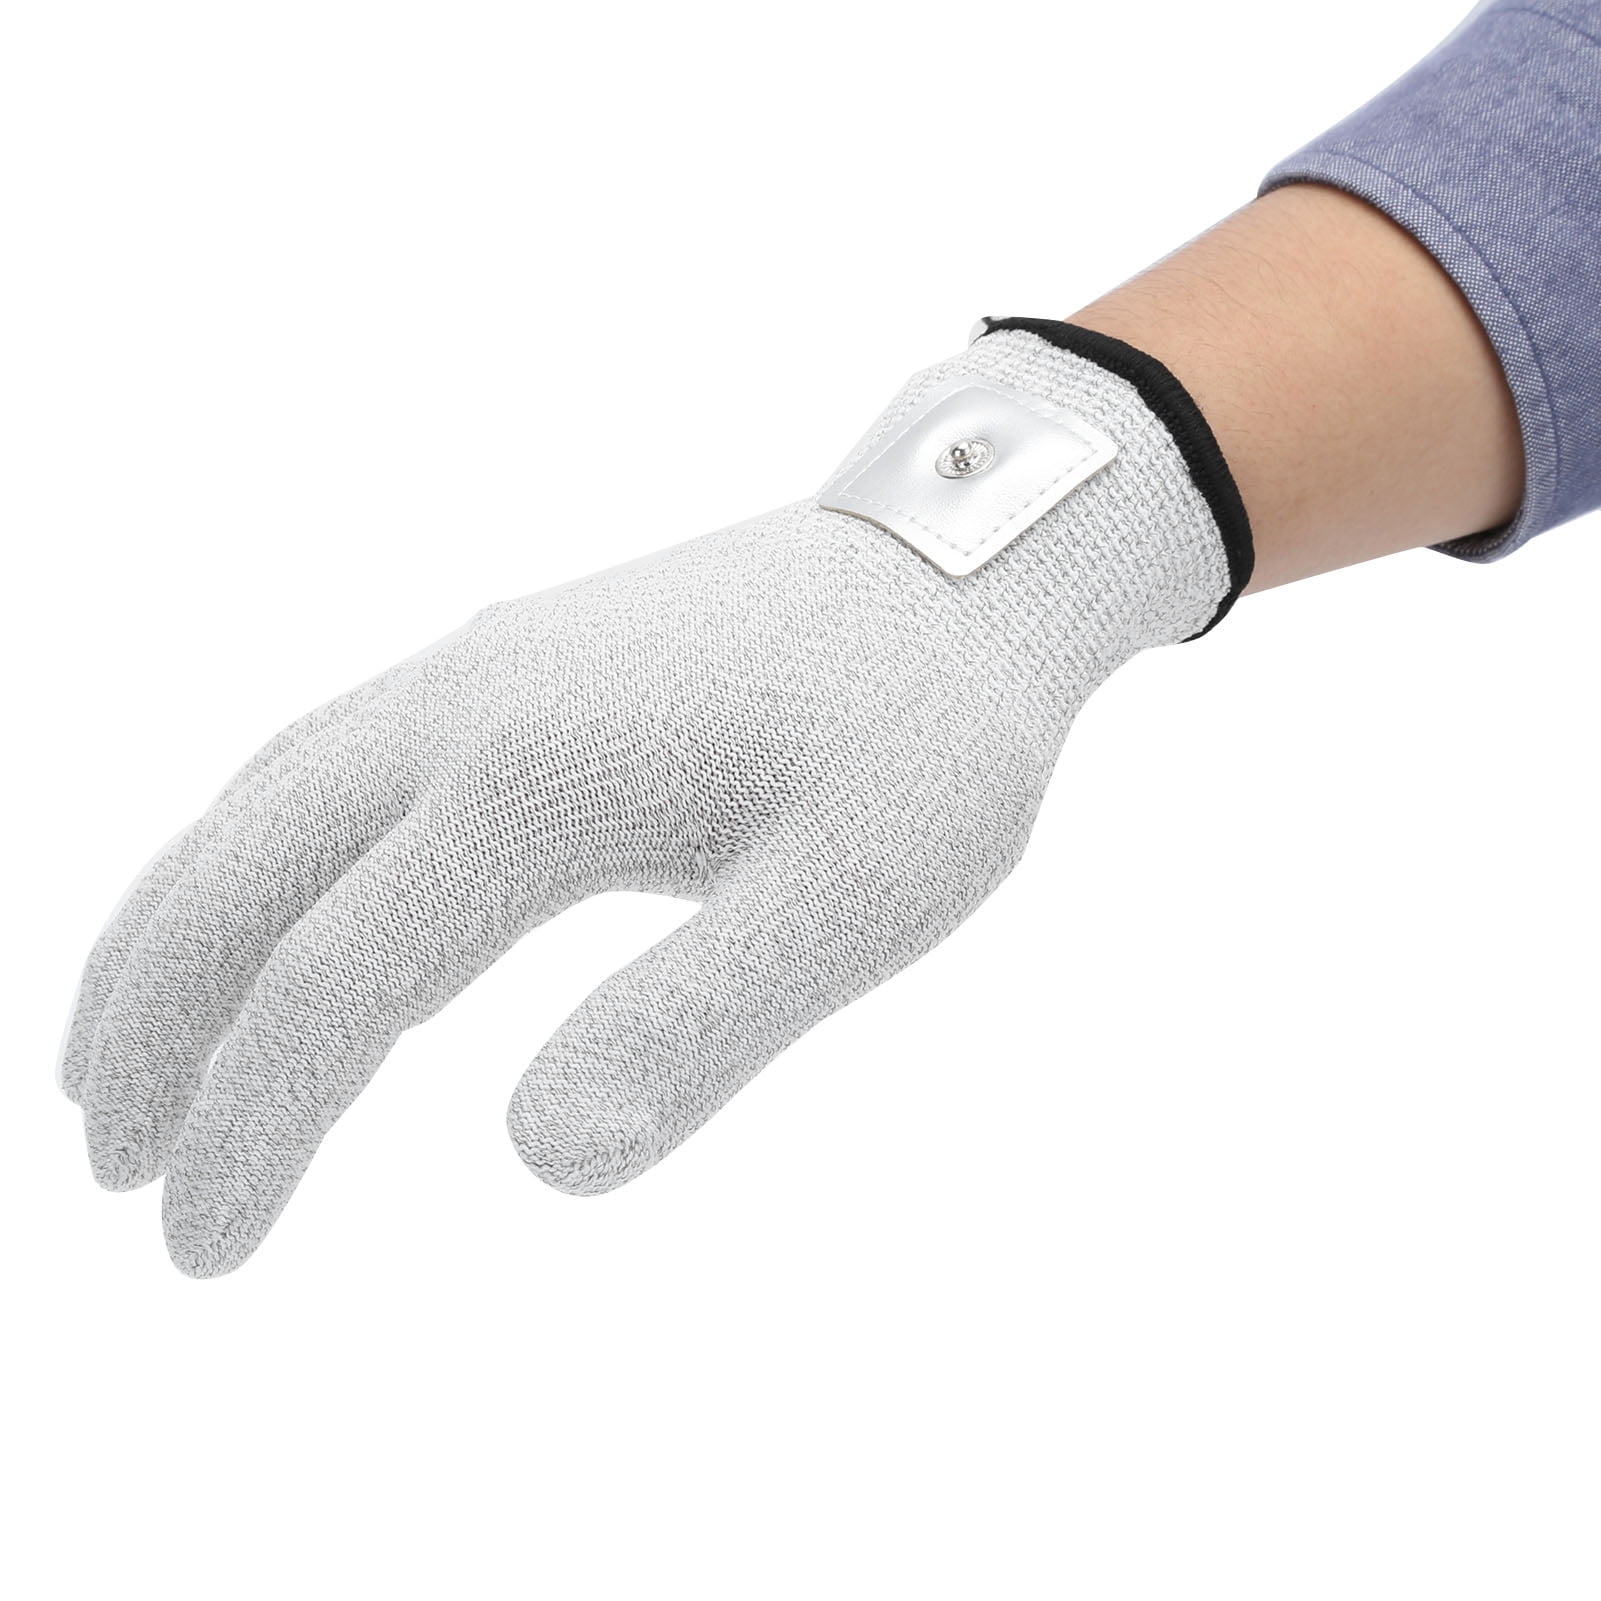 ChoiceMMed TENS Device with Electrode Gloves Pair – Conductive